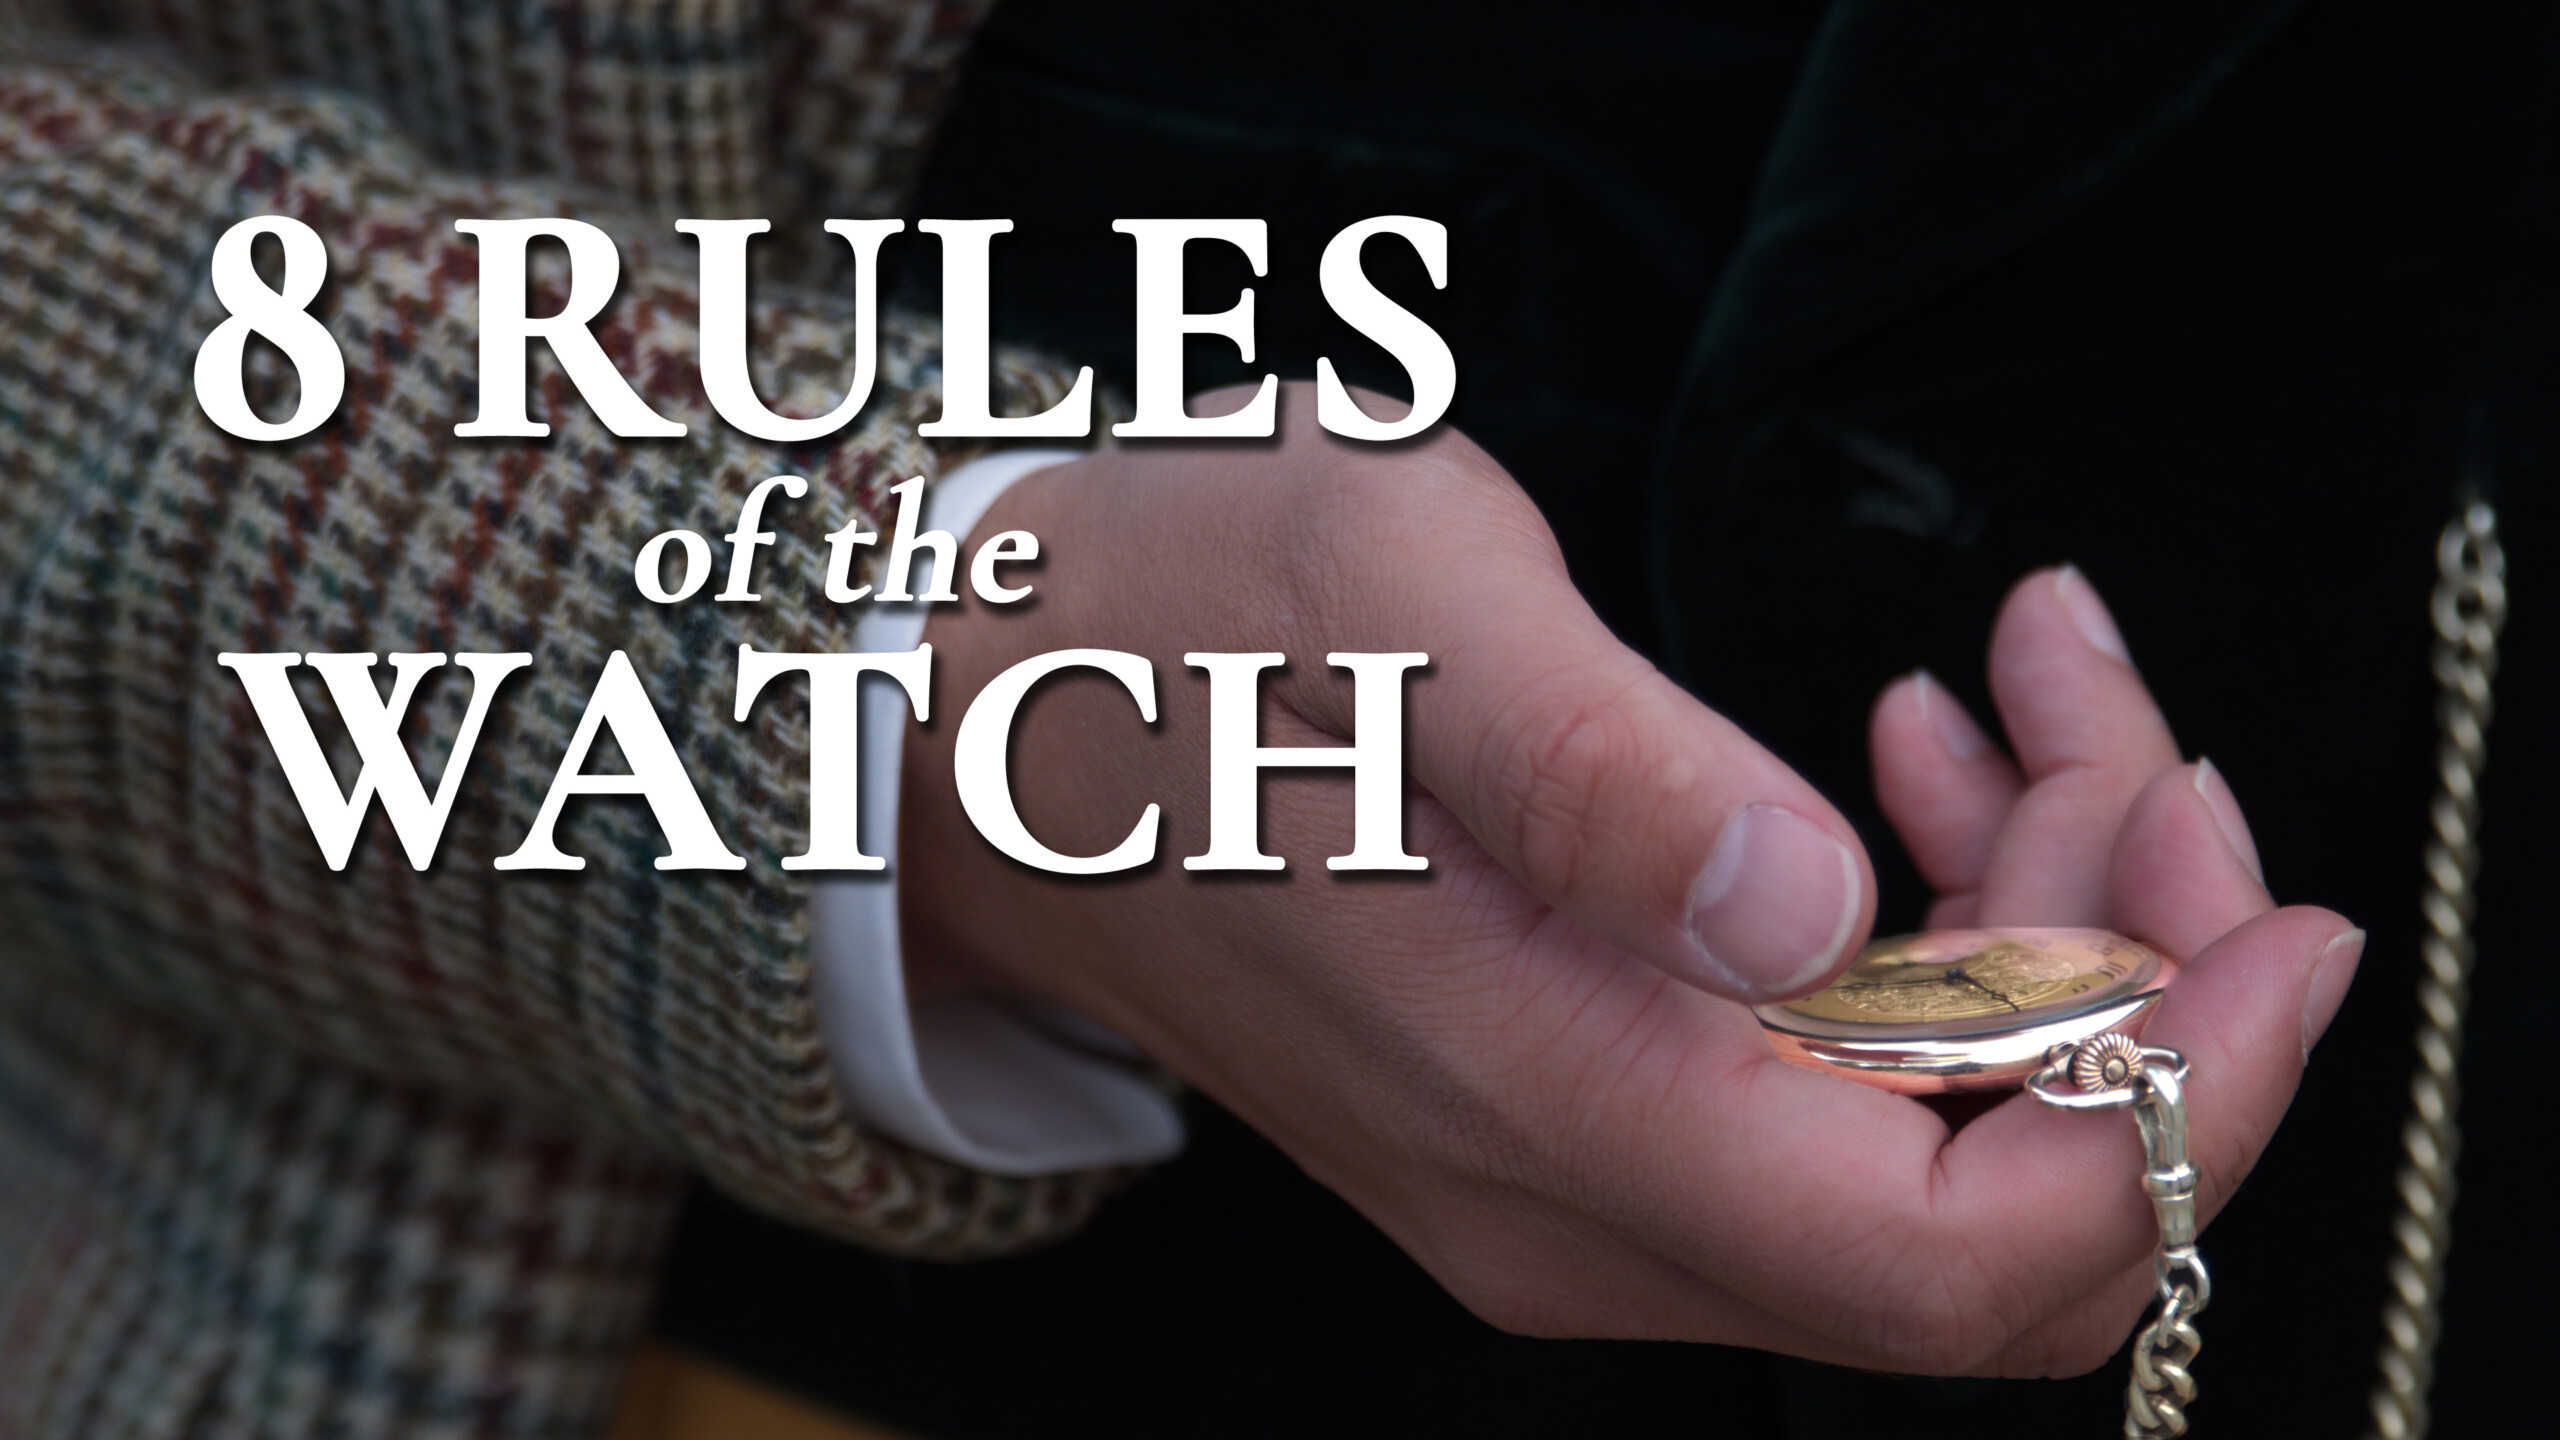 8 rules of the watch 3840x2160 wp scaled